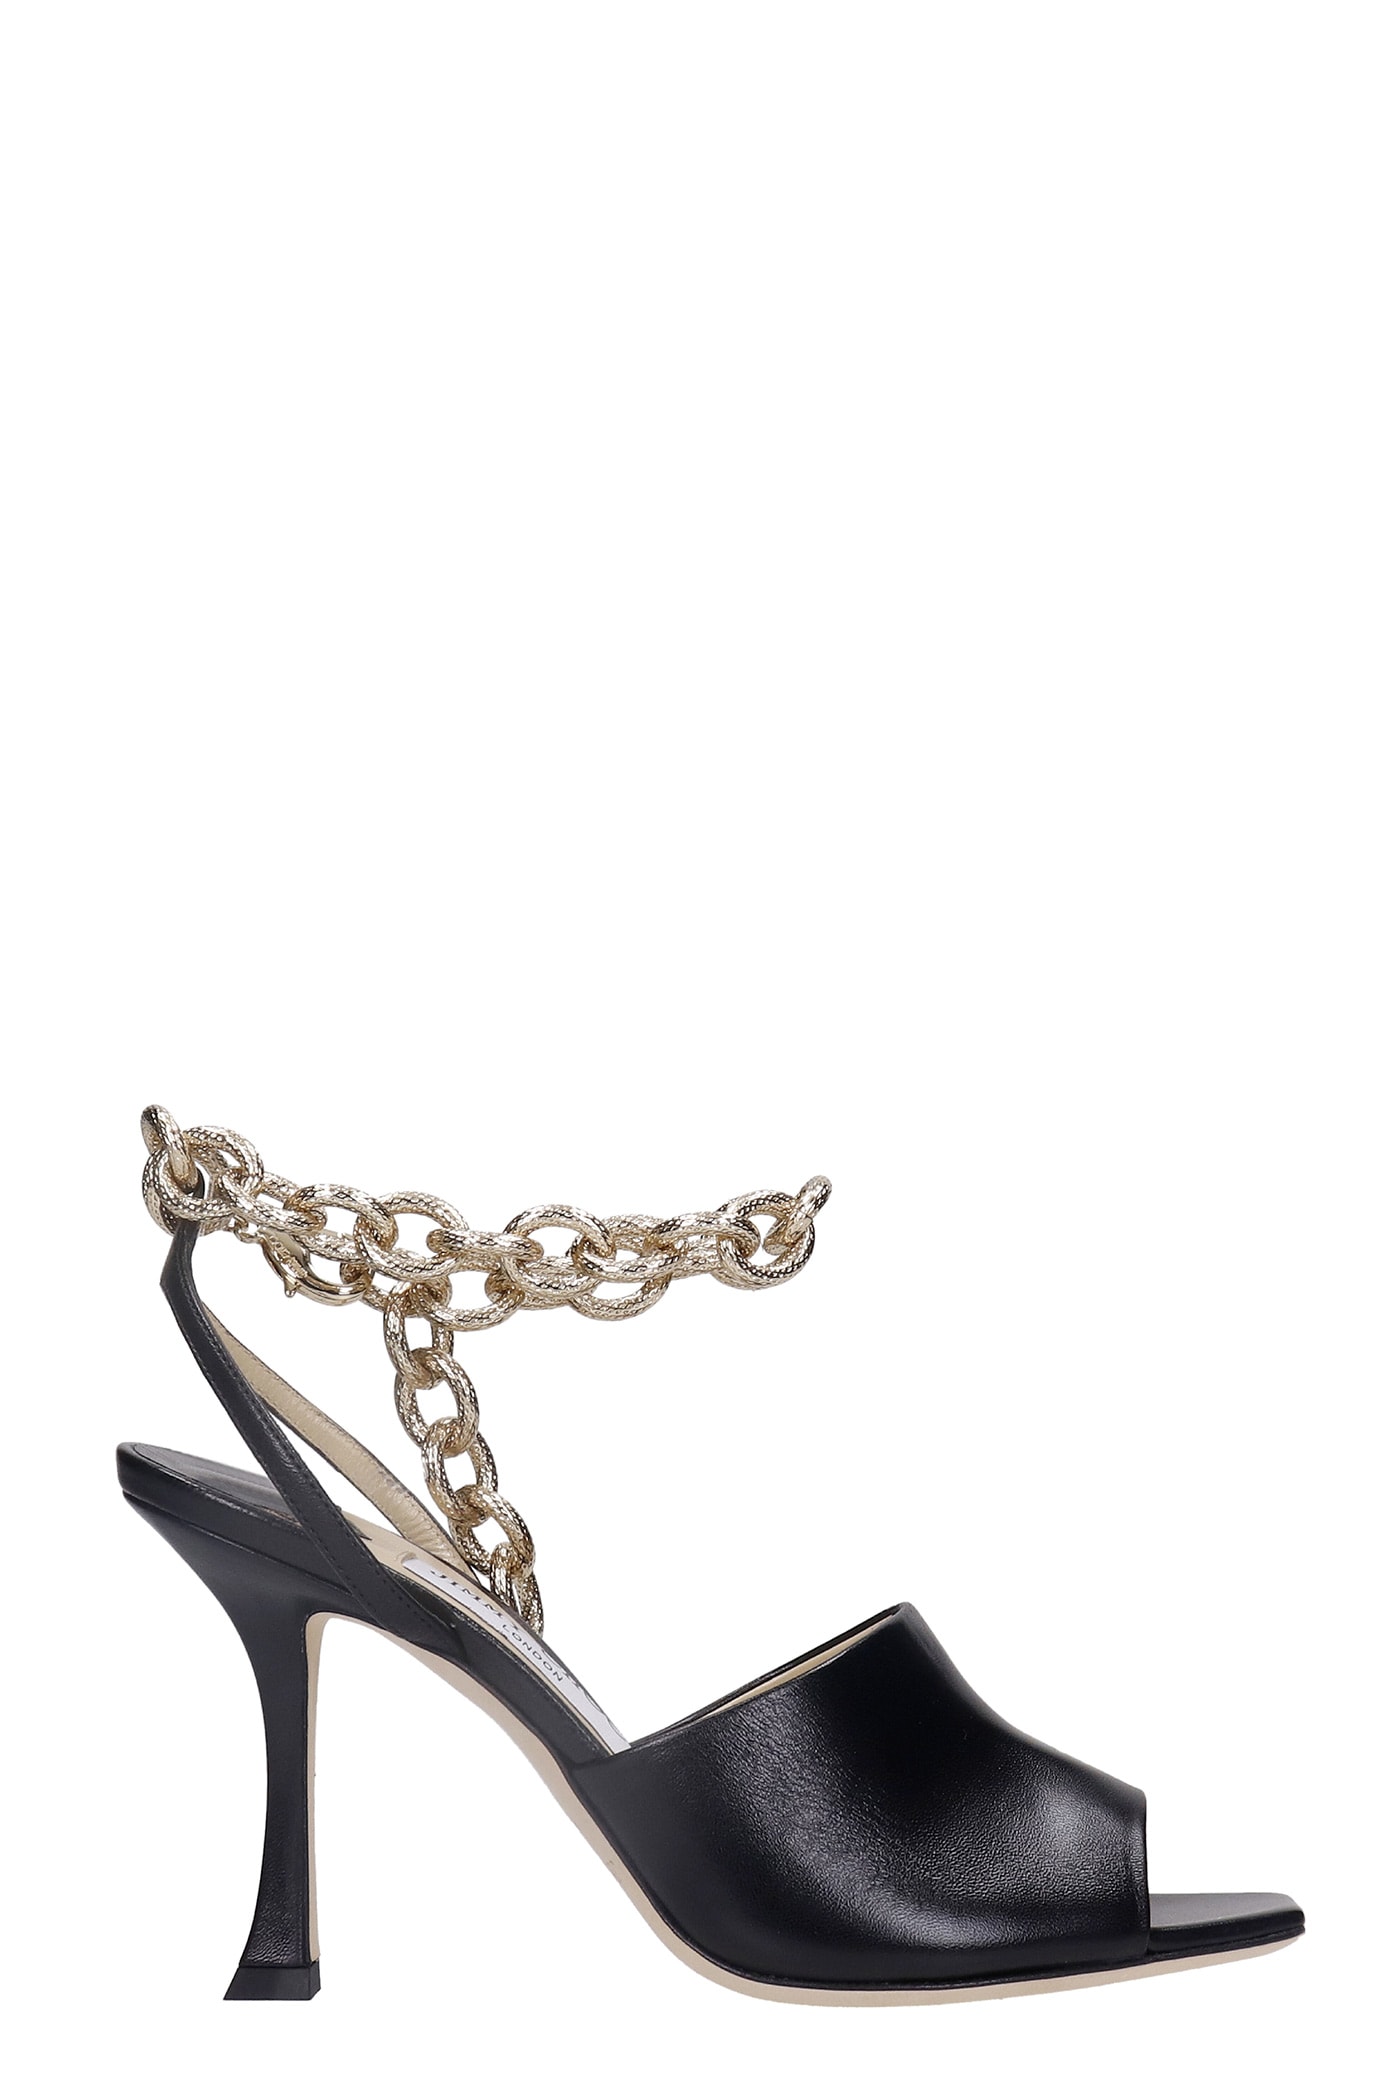 Buy Jimmy Choo Sae Sandals In Black Leather online, shop Jimmy Choo shoes with free shipping